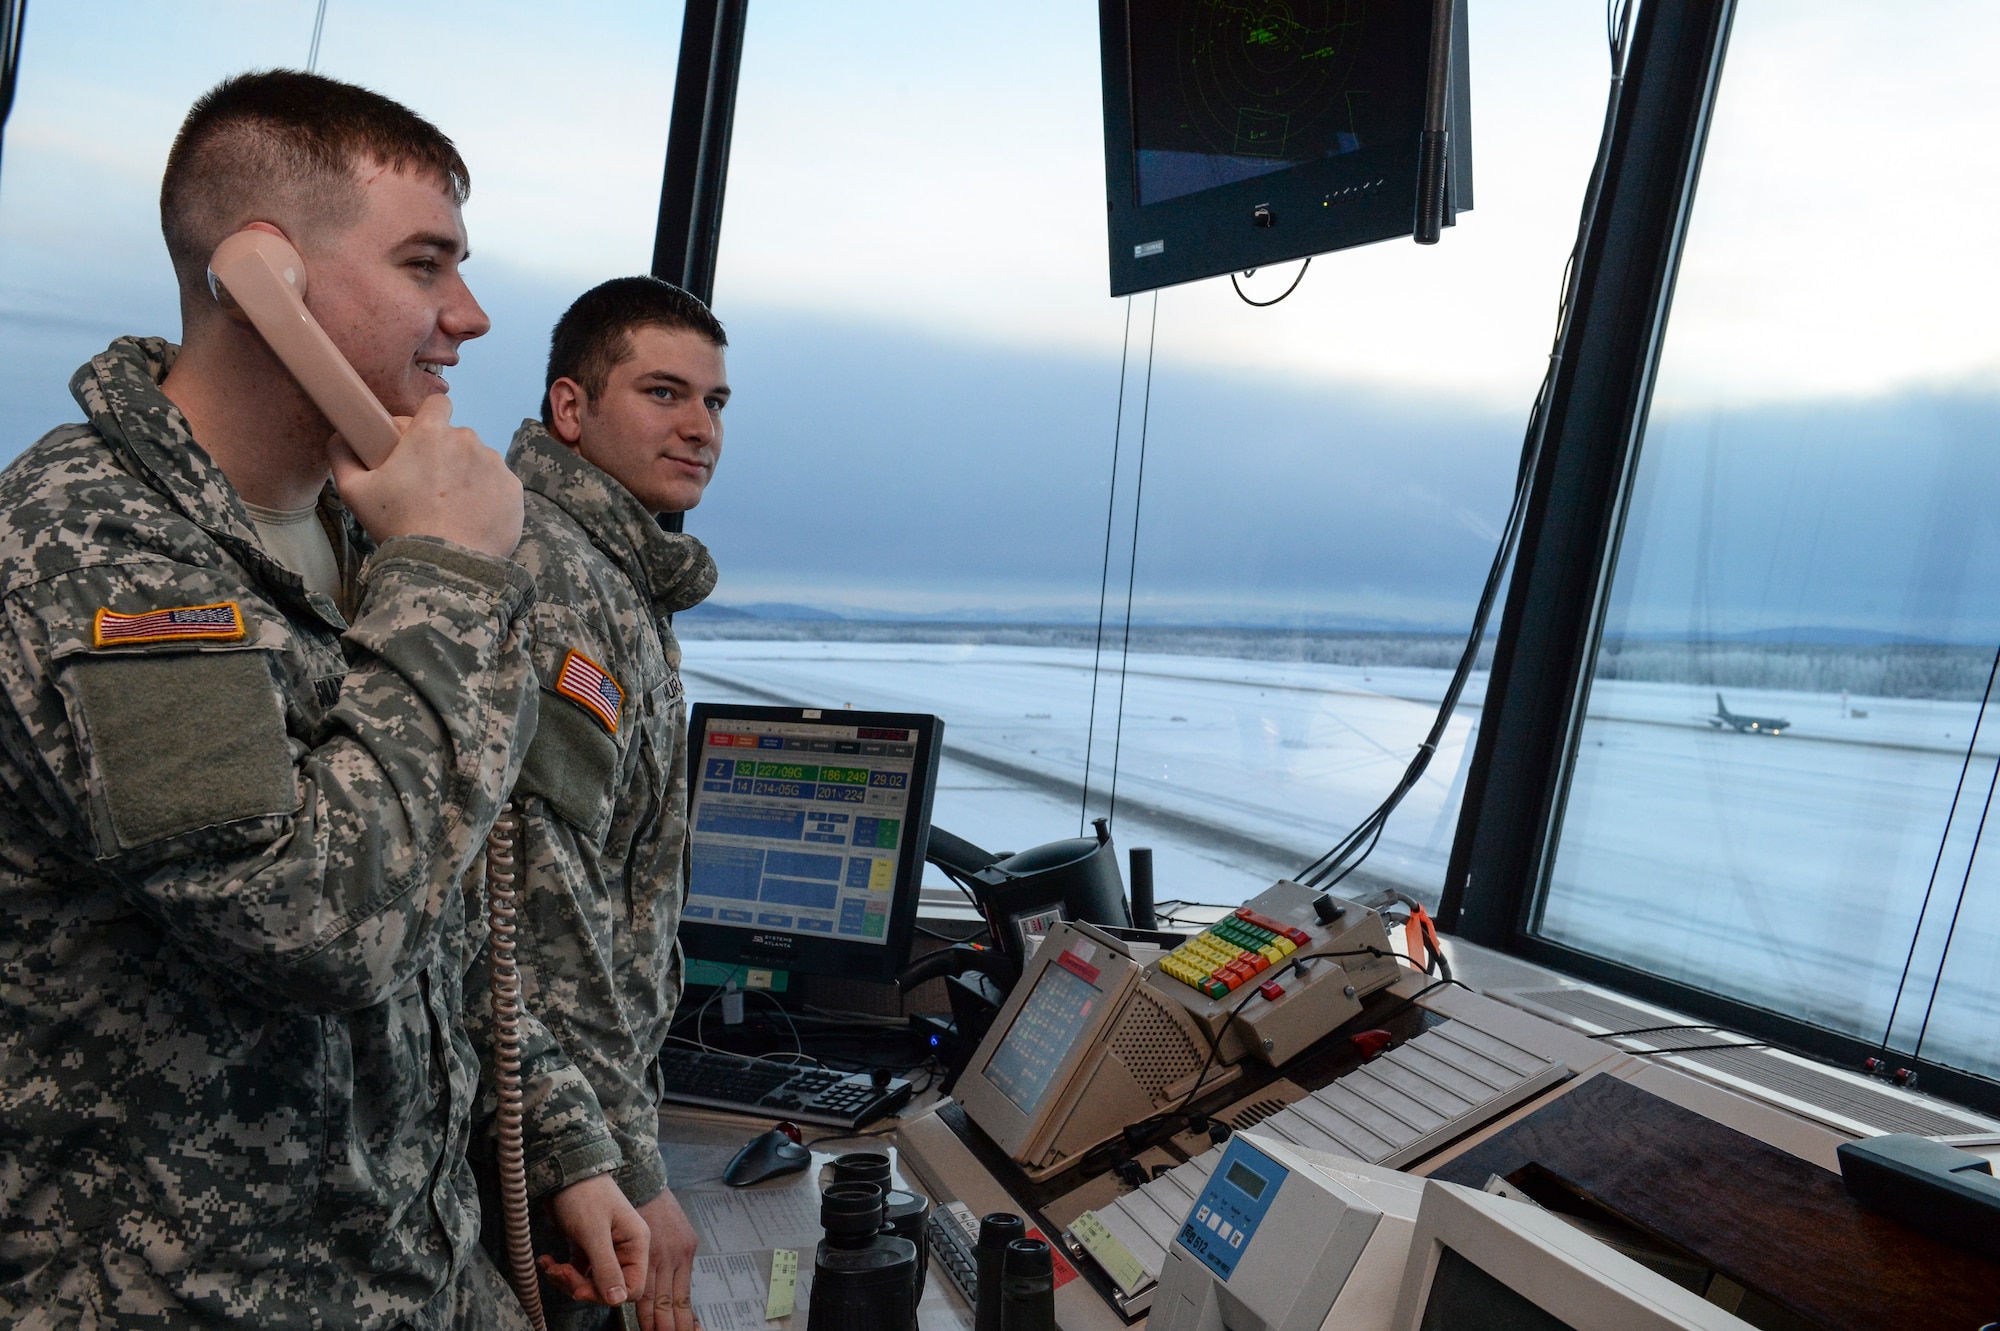 U.S. Army Spc. Christopher Smades speaks with a KC-135 Stratotanker pilot while Spc. Paul Murray watches the flight line for any hazards Jan. 14, 2014, Eielson Air Force Base, Alaska. Murray and Smades, Fox Company 1-51, Aviation Battalion air traffic control specialists, are training with Air Force air traffic controllers in preparation for an upcoming deployment. (U.S. Air Force photo by Airman 1st Class Peter Reft/Released)